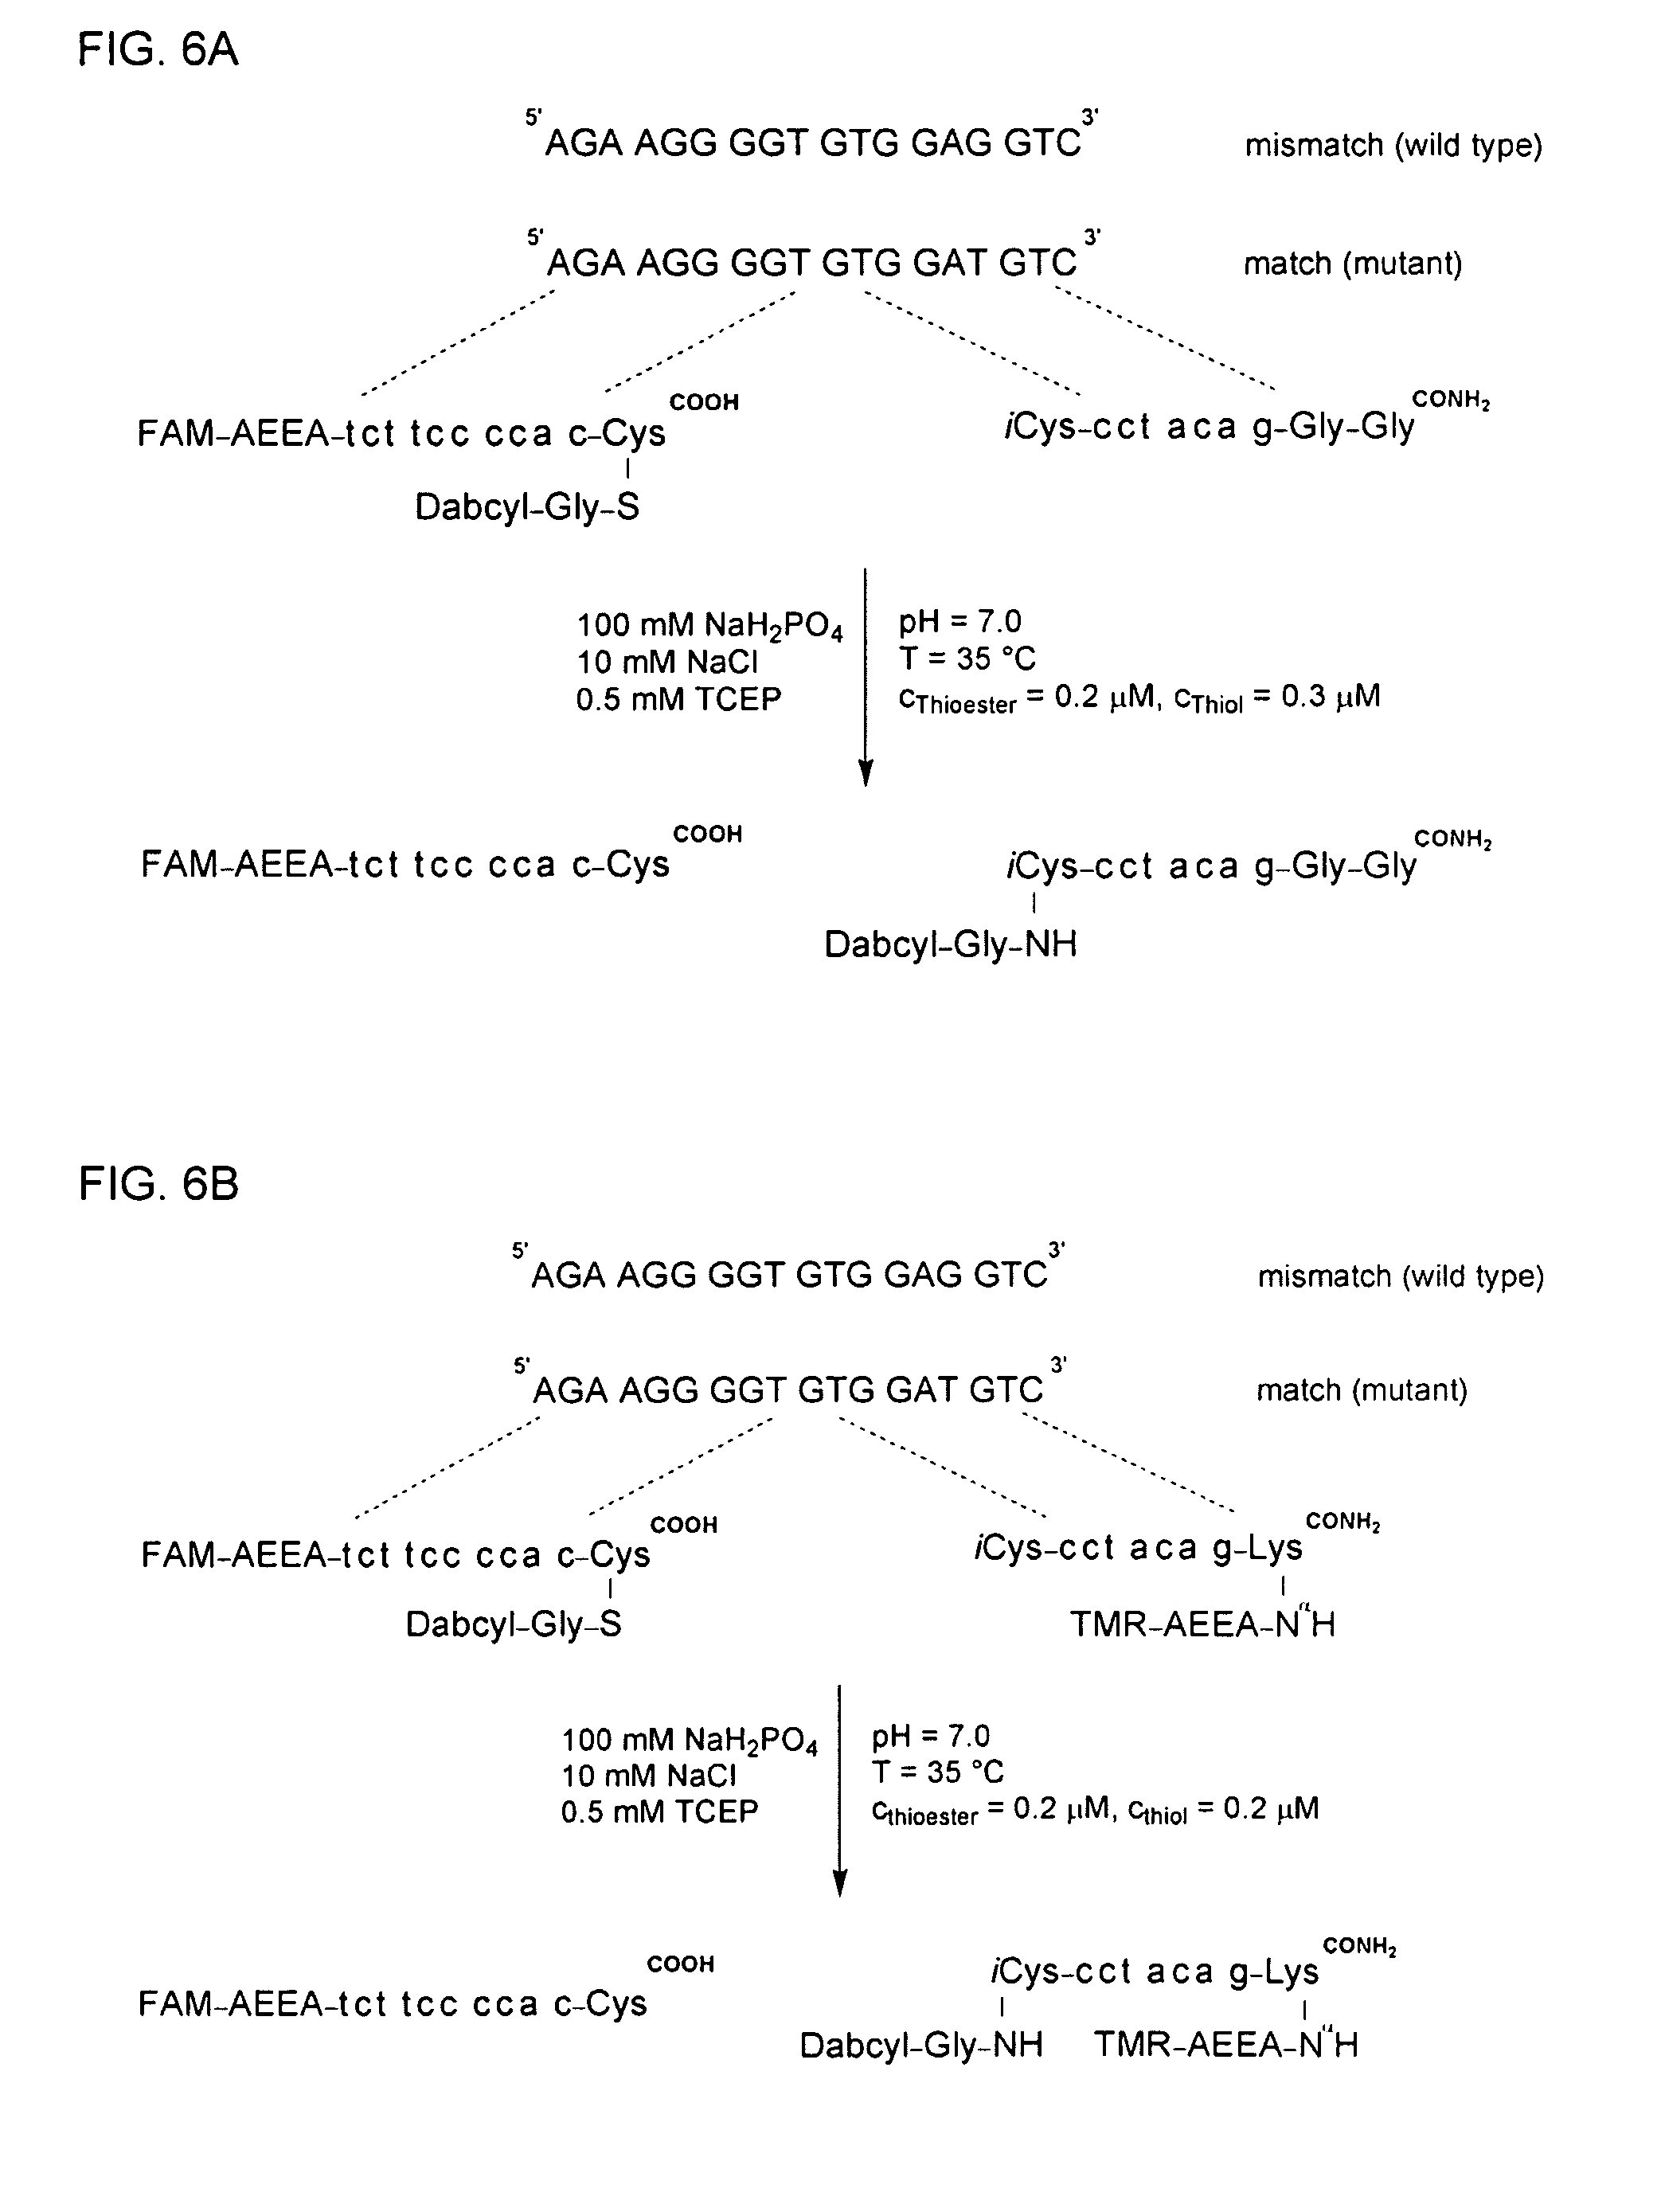 Method for Detecting Target Nucleic Acids Using Template Catalyzed Transfer Reactions